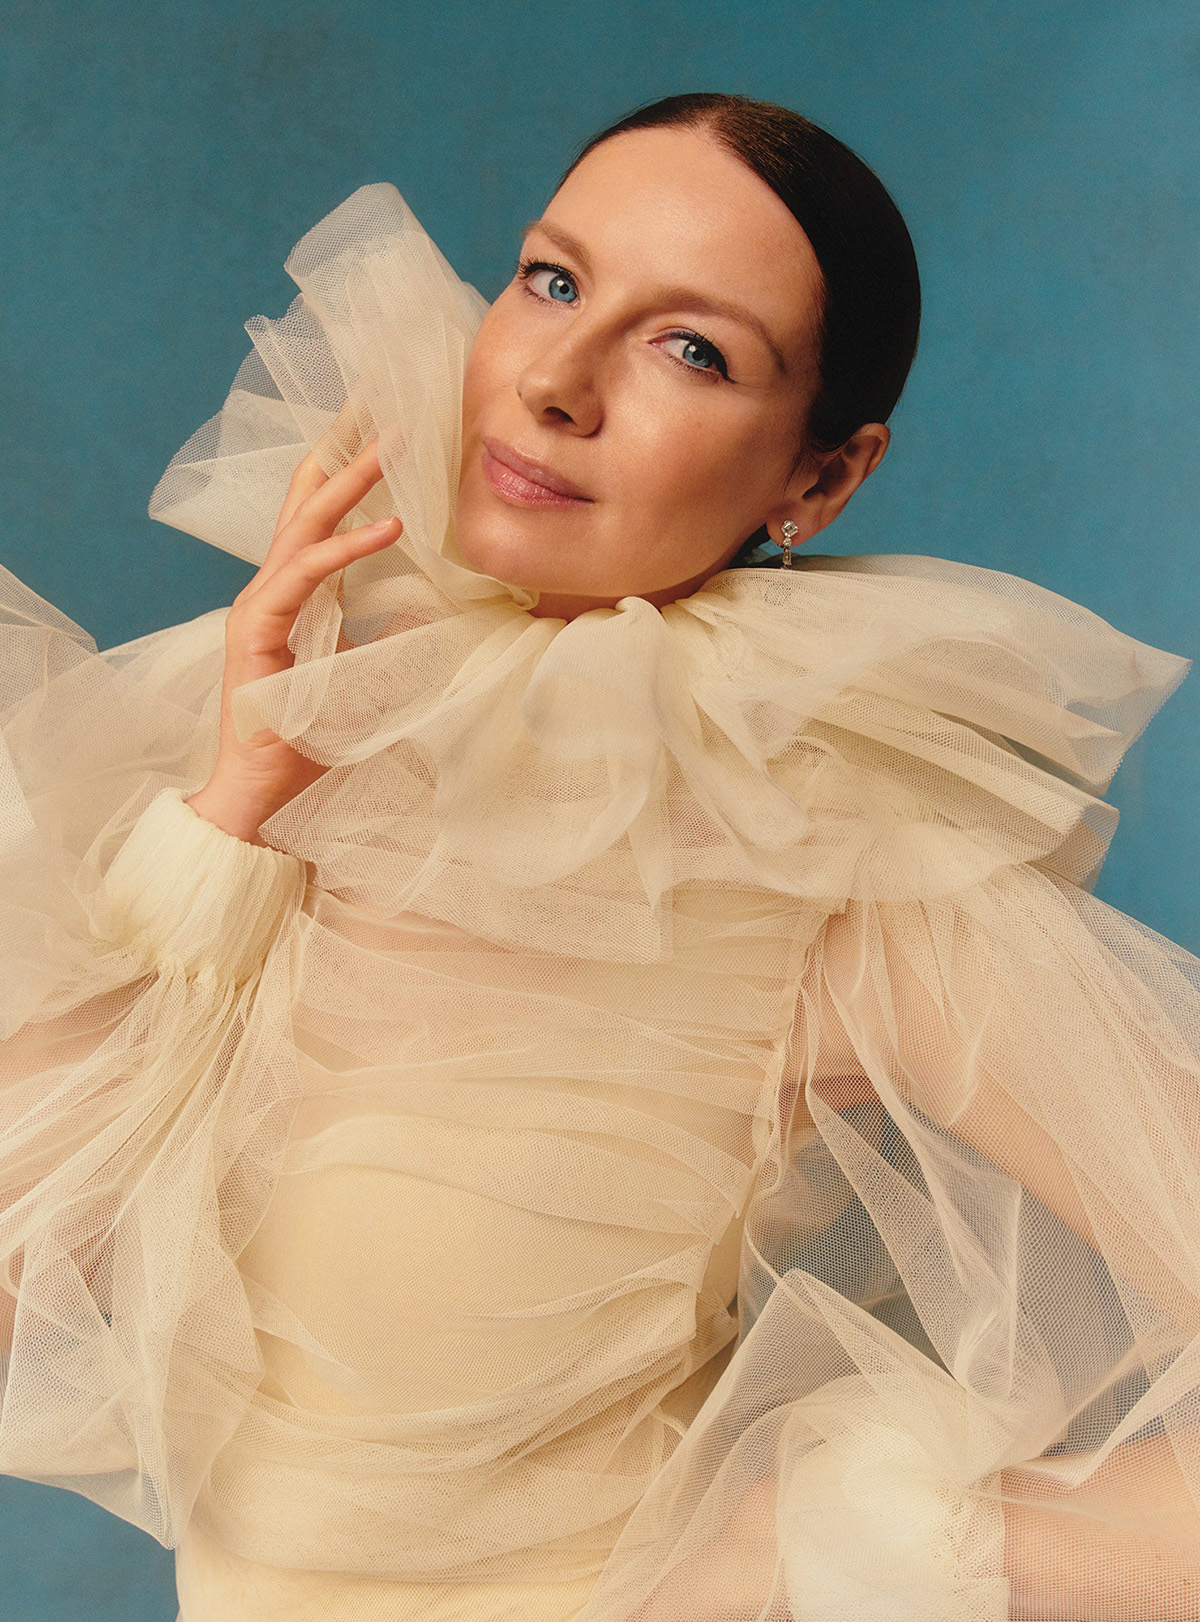 Caitriona Balfe in Marc Jacobs on Vanity Fair January 2022 cover by Nick Riley Bentham